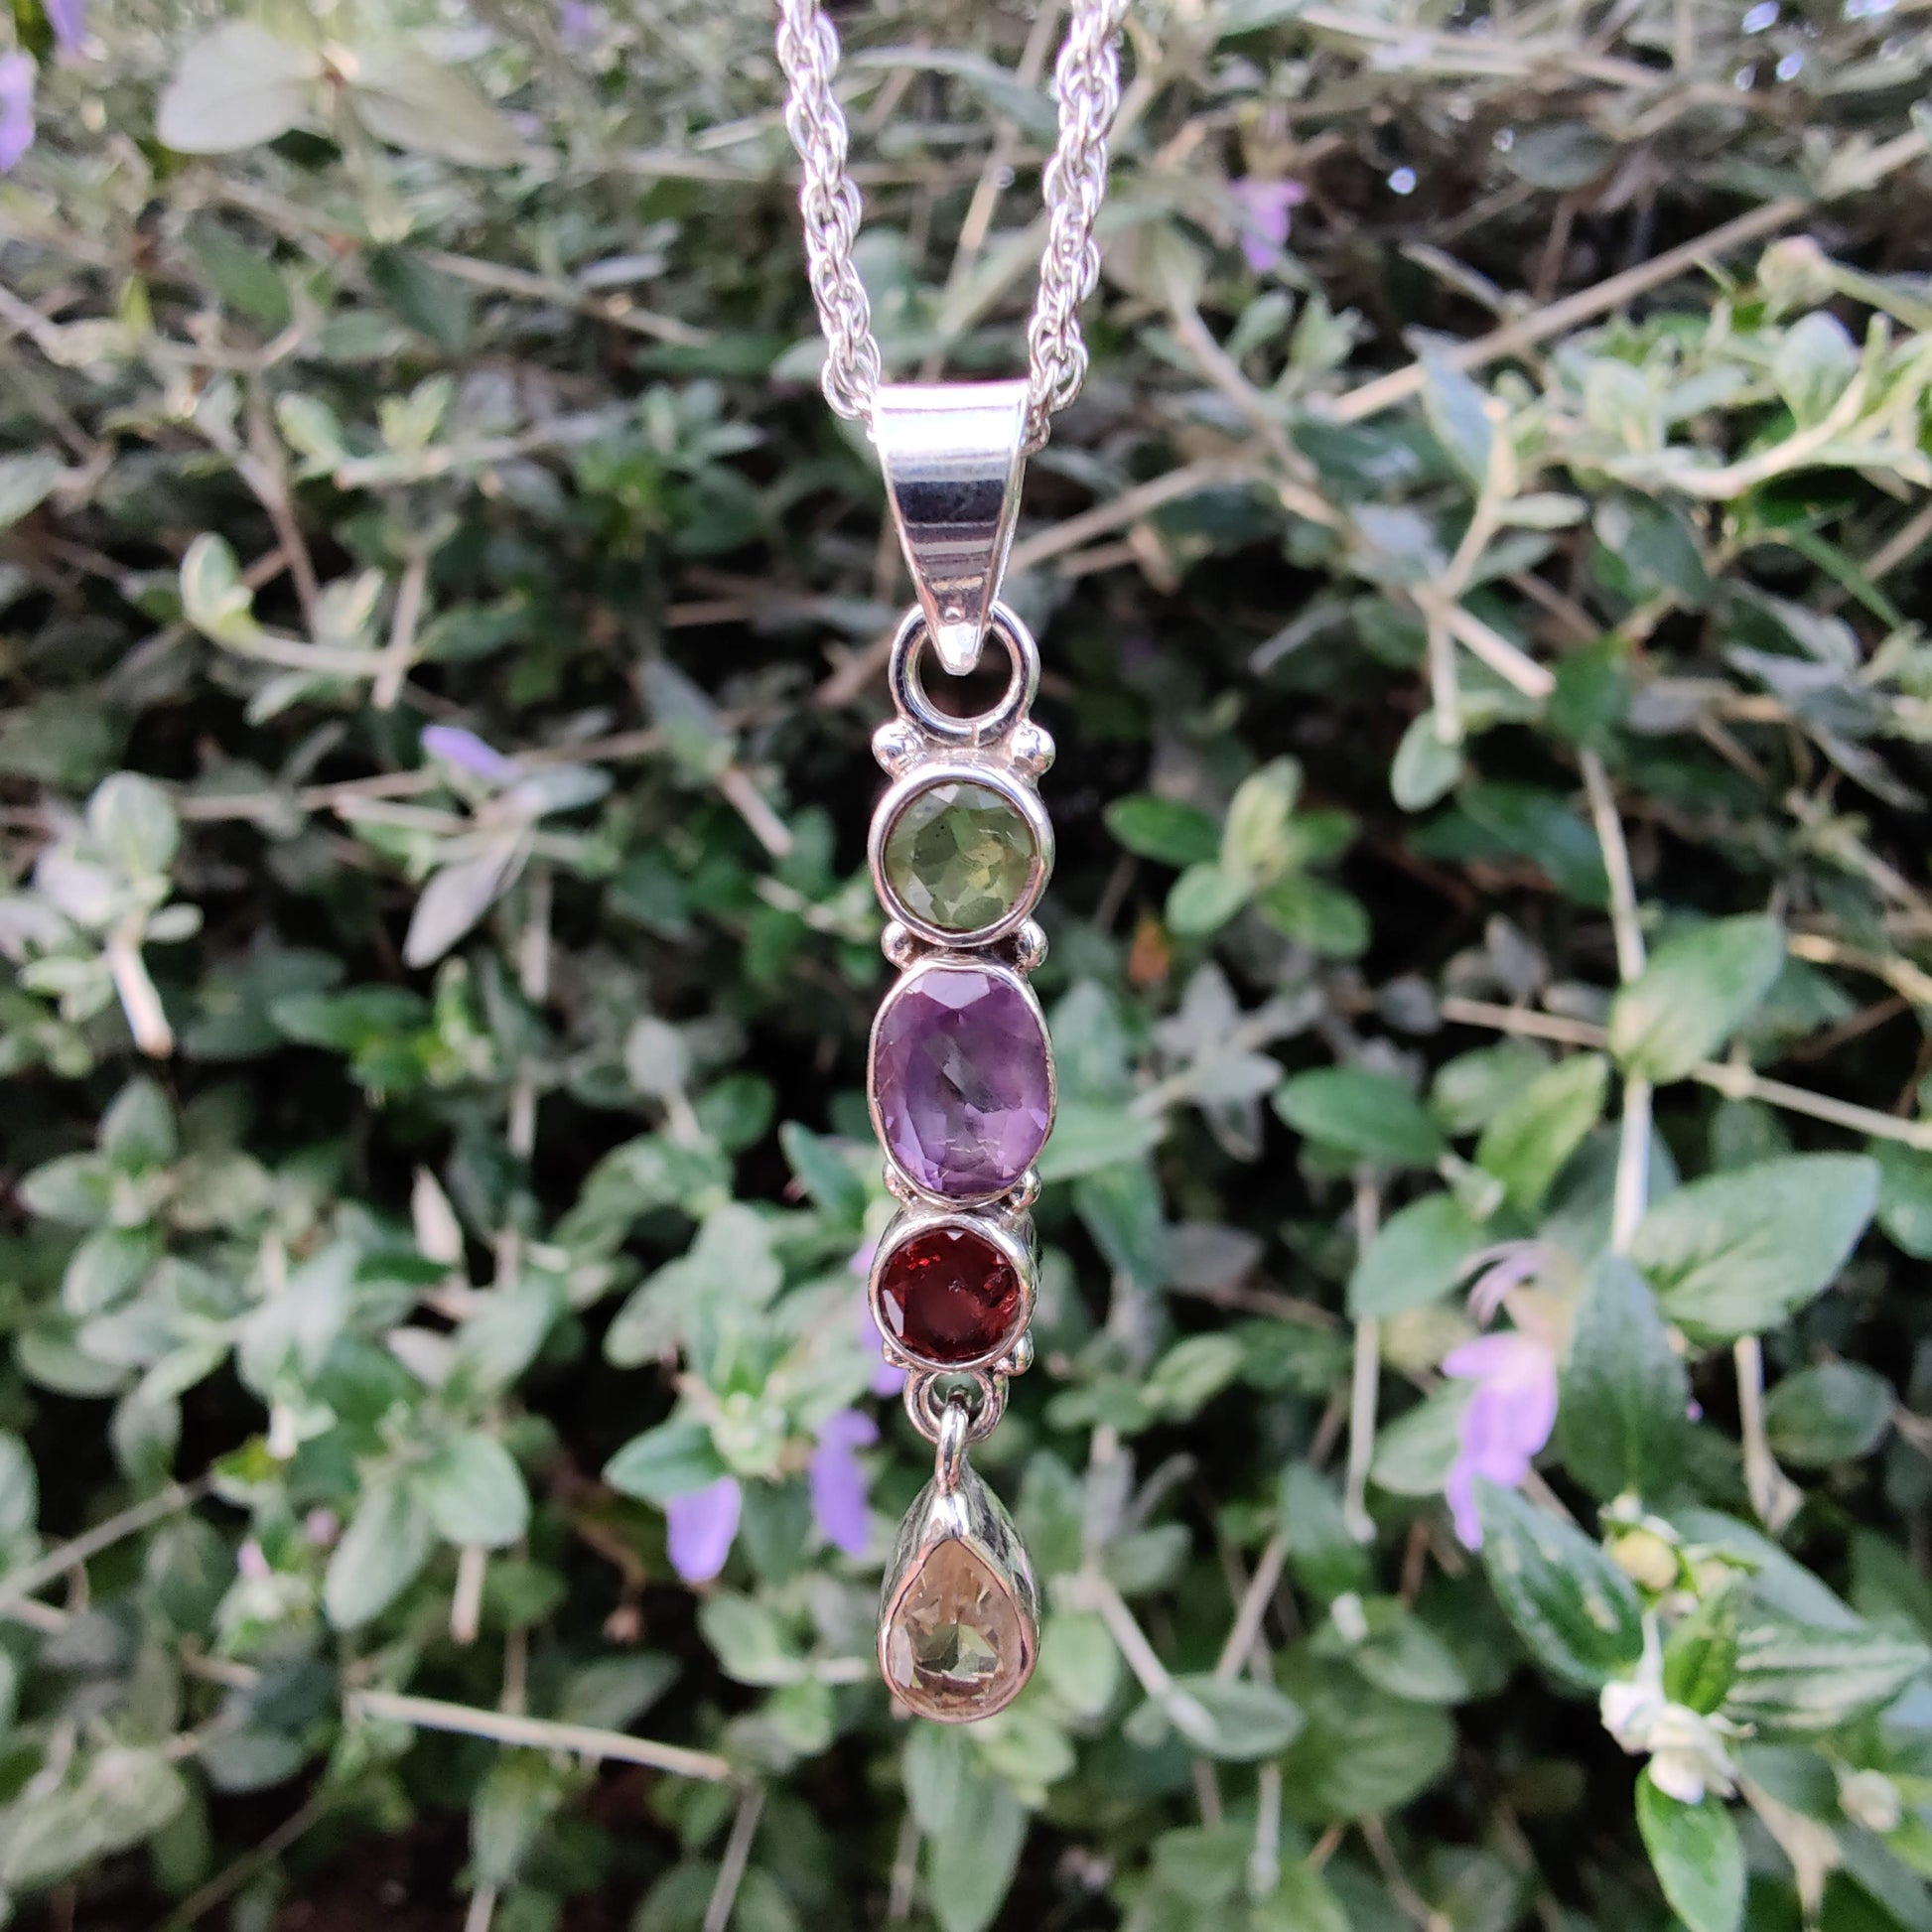 Peridot, Amethyst, Ruby and Citrine Long 925 Sterling Silver Pendant - Rivendell Shop